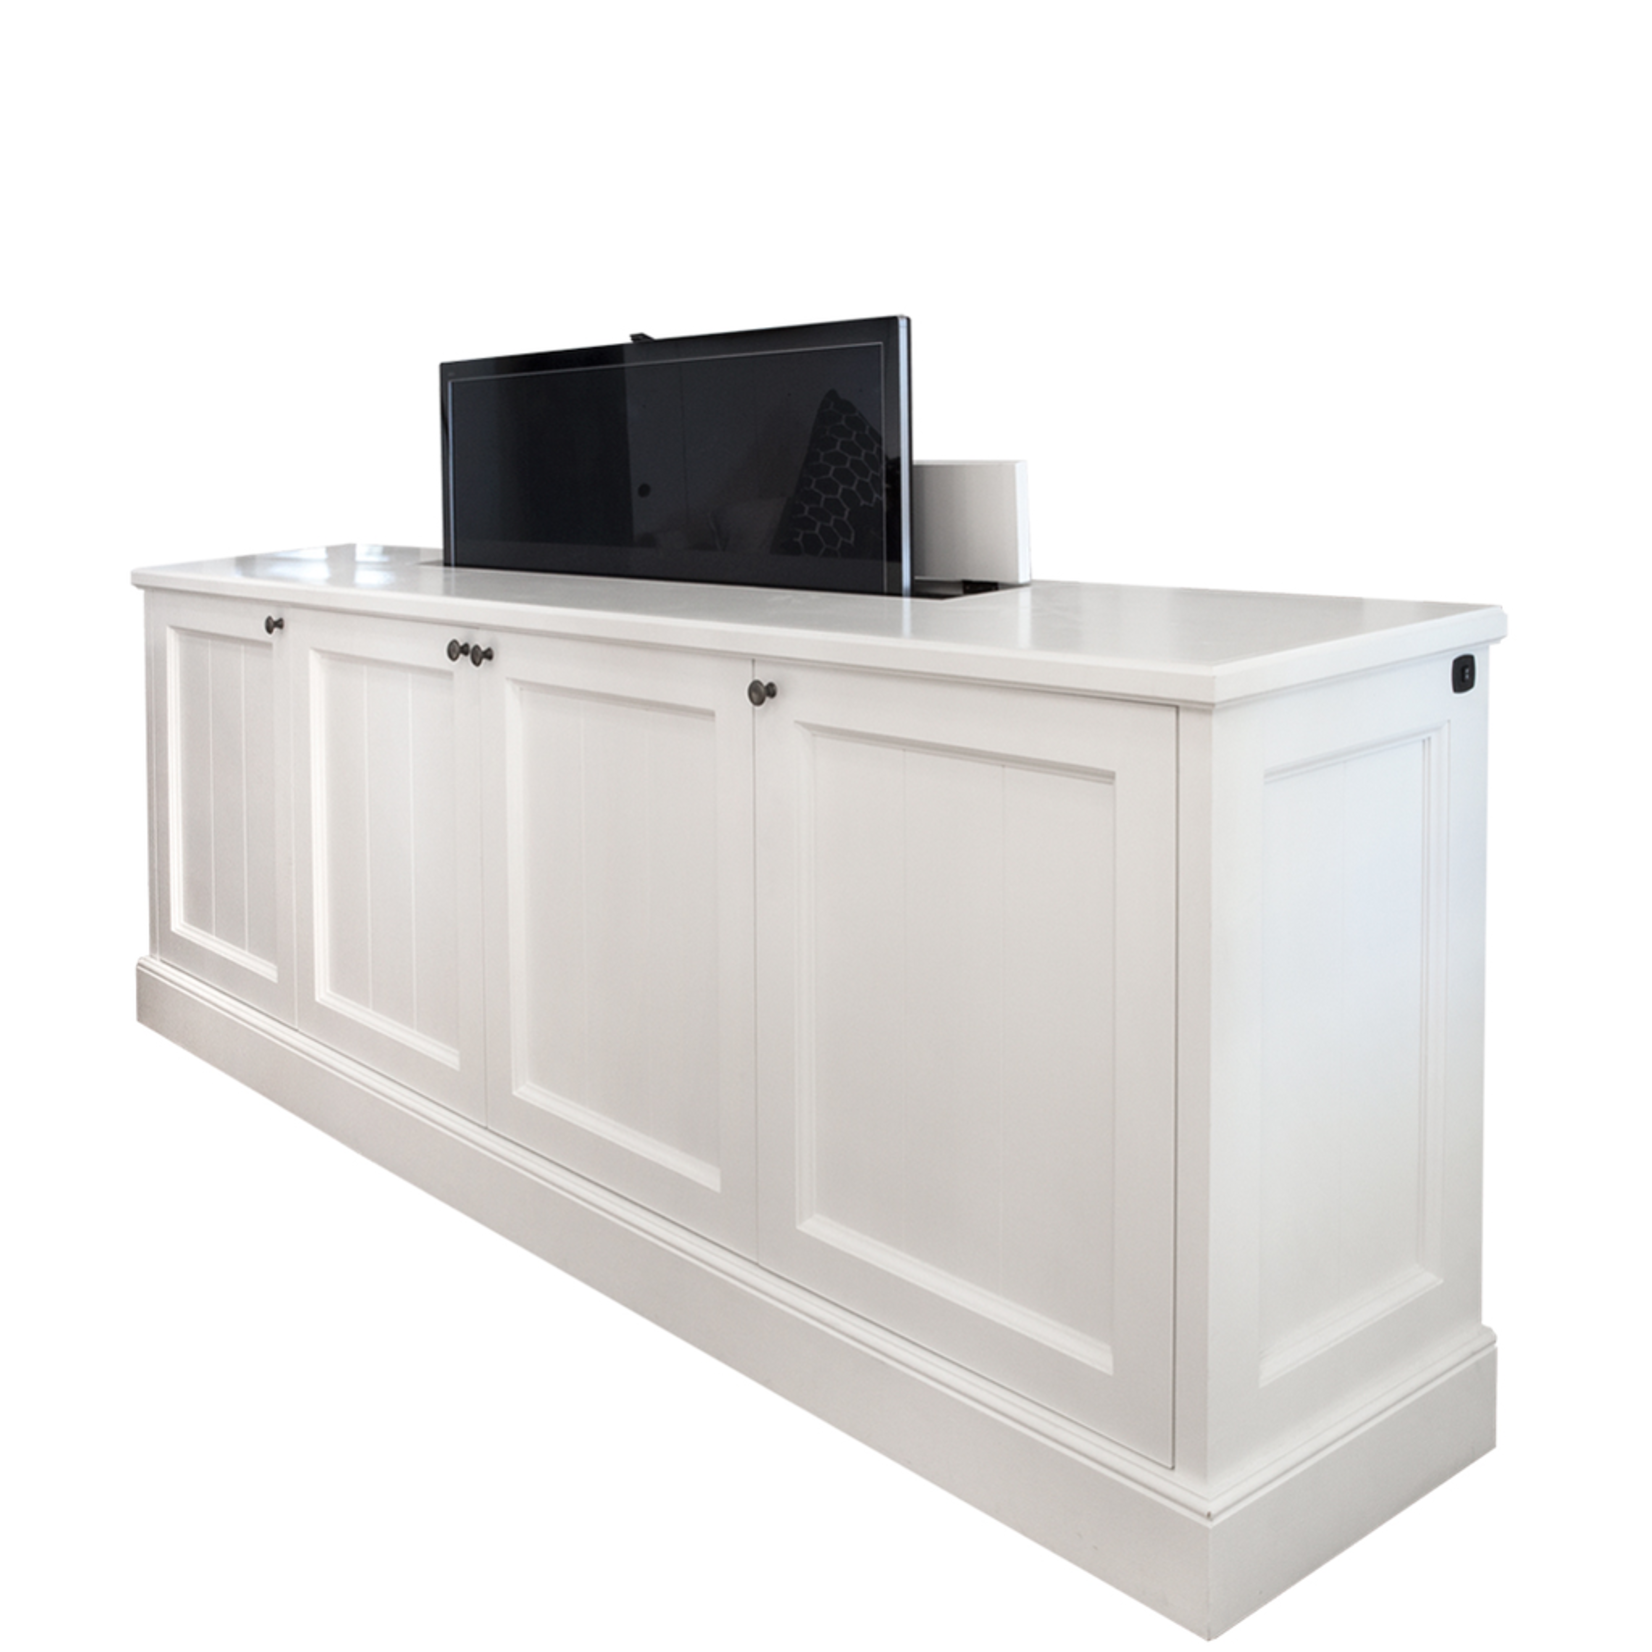 TV-Sideboard mit living 245x42xH85cm weiss - more Lift and GmbH Spectroom